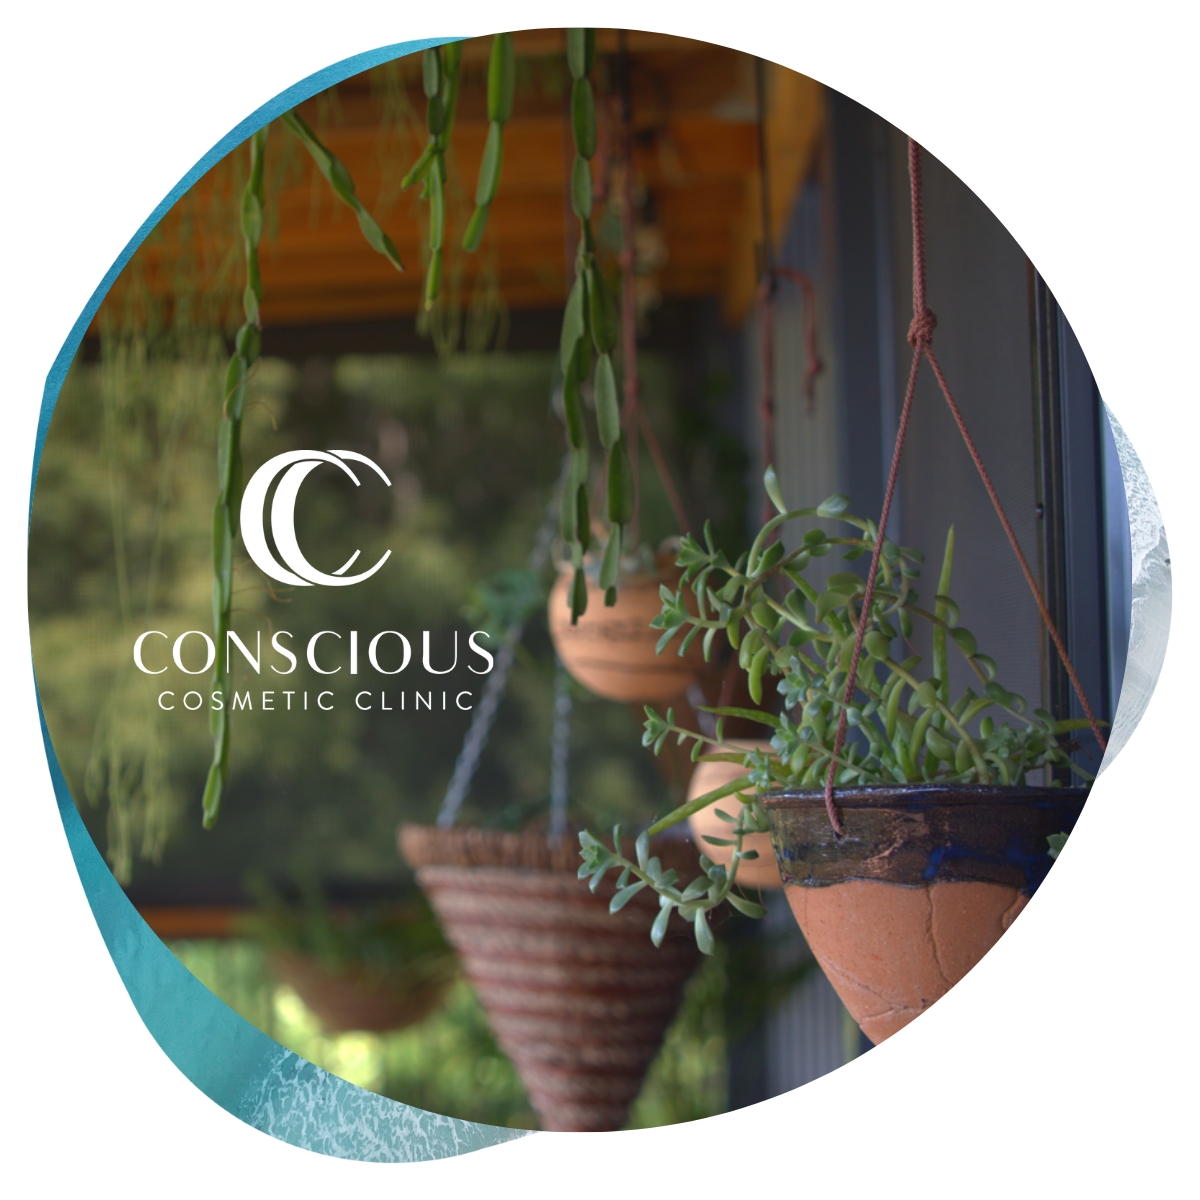 Conscious Cosmetic Clinic top image